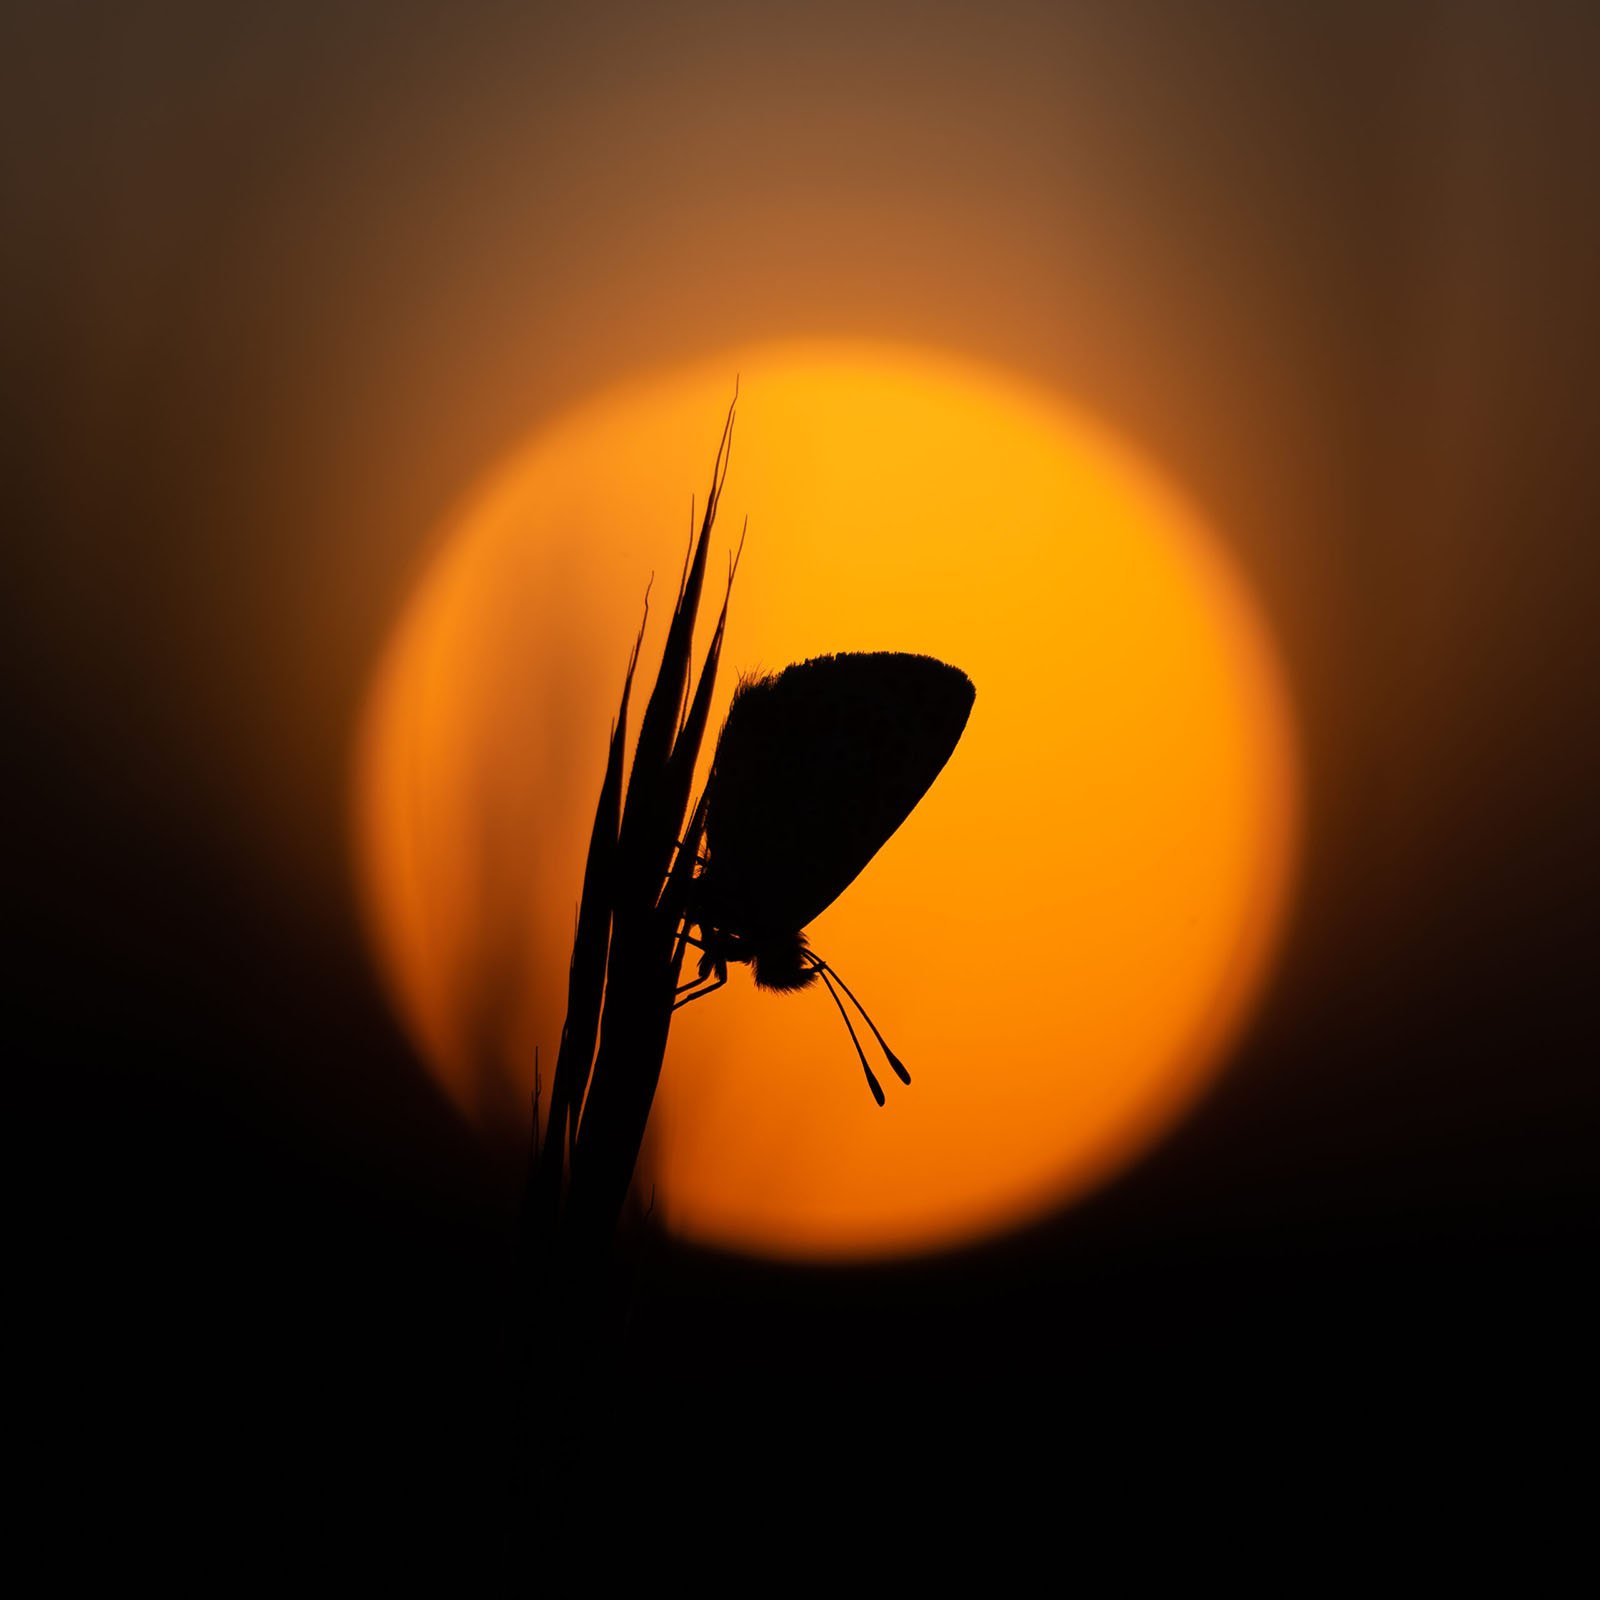 Silhouette of a butterfly perched on a blade of grass against a large, glowing orange sun setting in the background. The dark outlines highlight the delicate details of the butterfly and grass, contrasting with the vibrant, warm colors of the sunset.